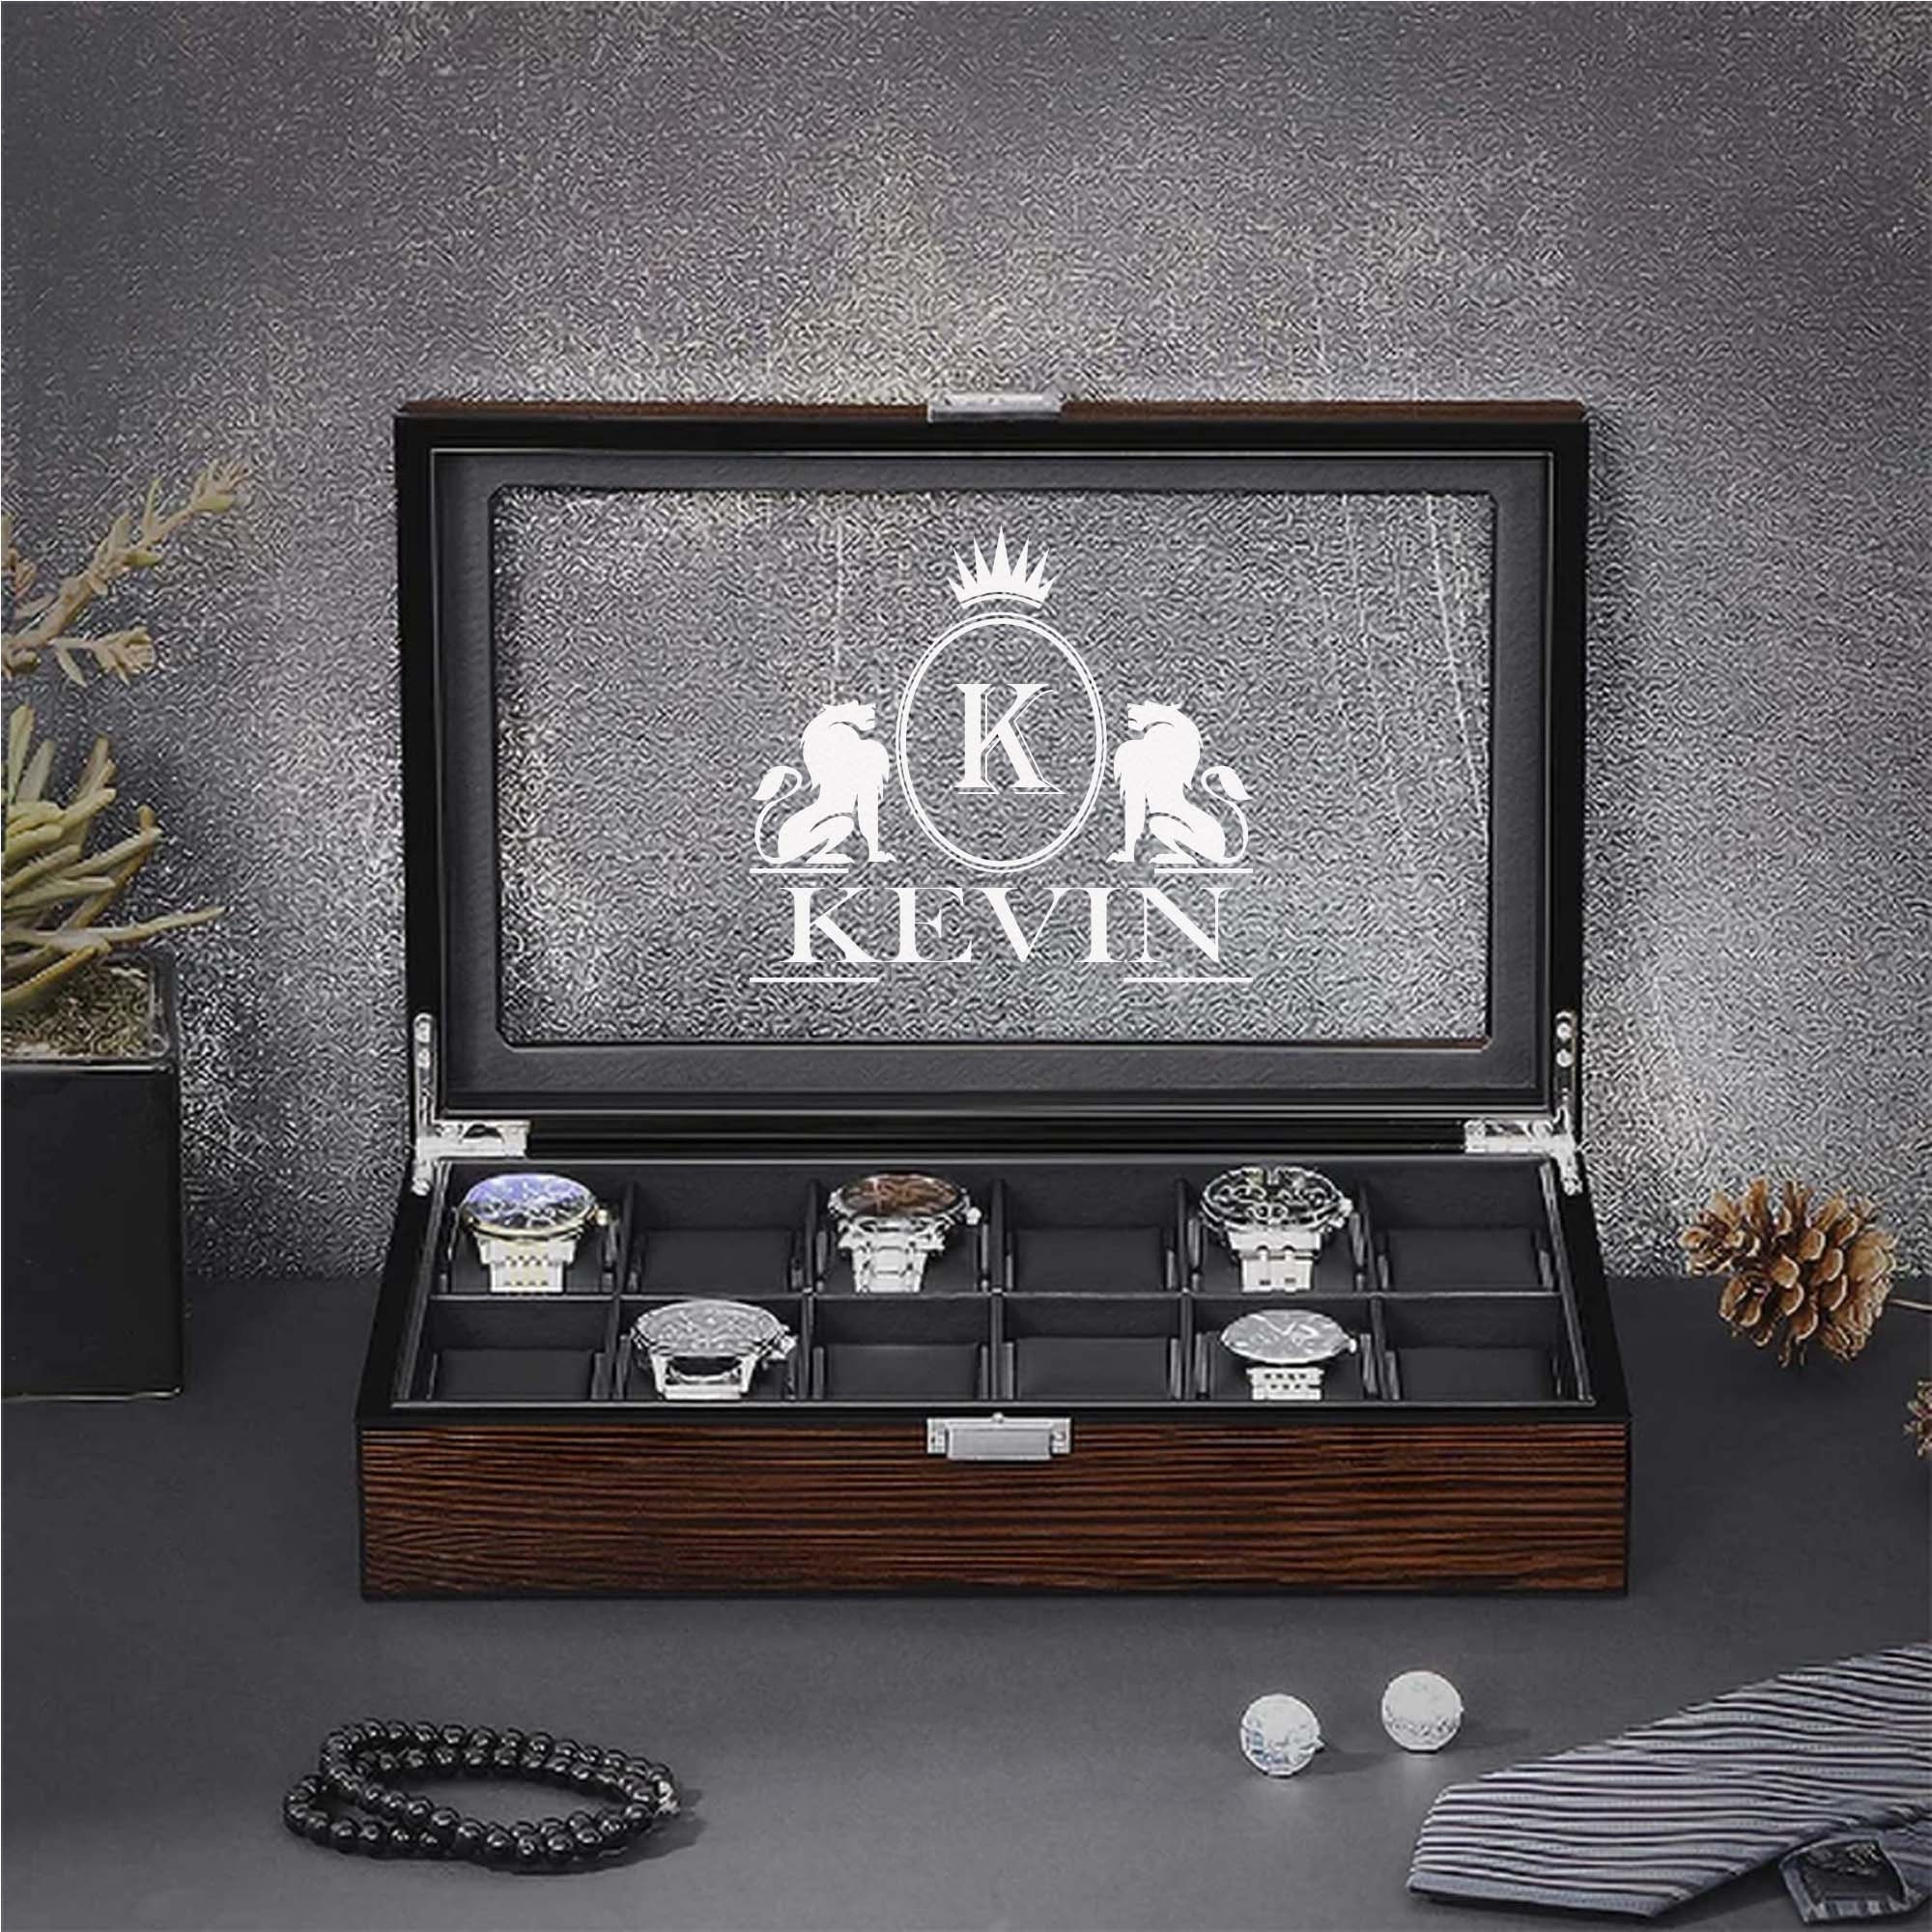 BEWISHOME Wooden Watch Box for Men - Luxury Watch Case, Real Glass Top,  Smooth Faux Leather Interior…See more BEWISHOME Wooden Watch Box for Men 